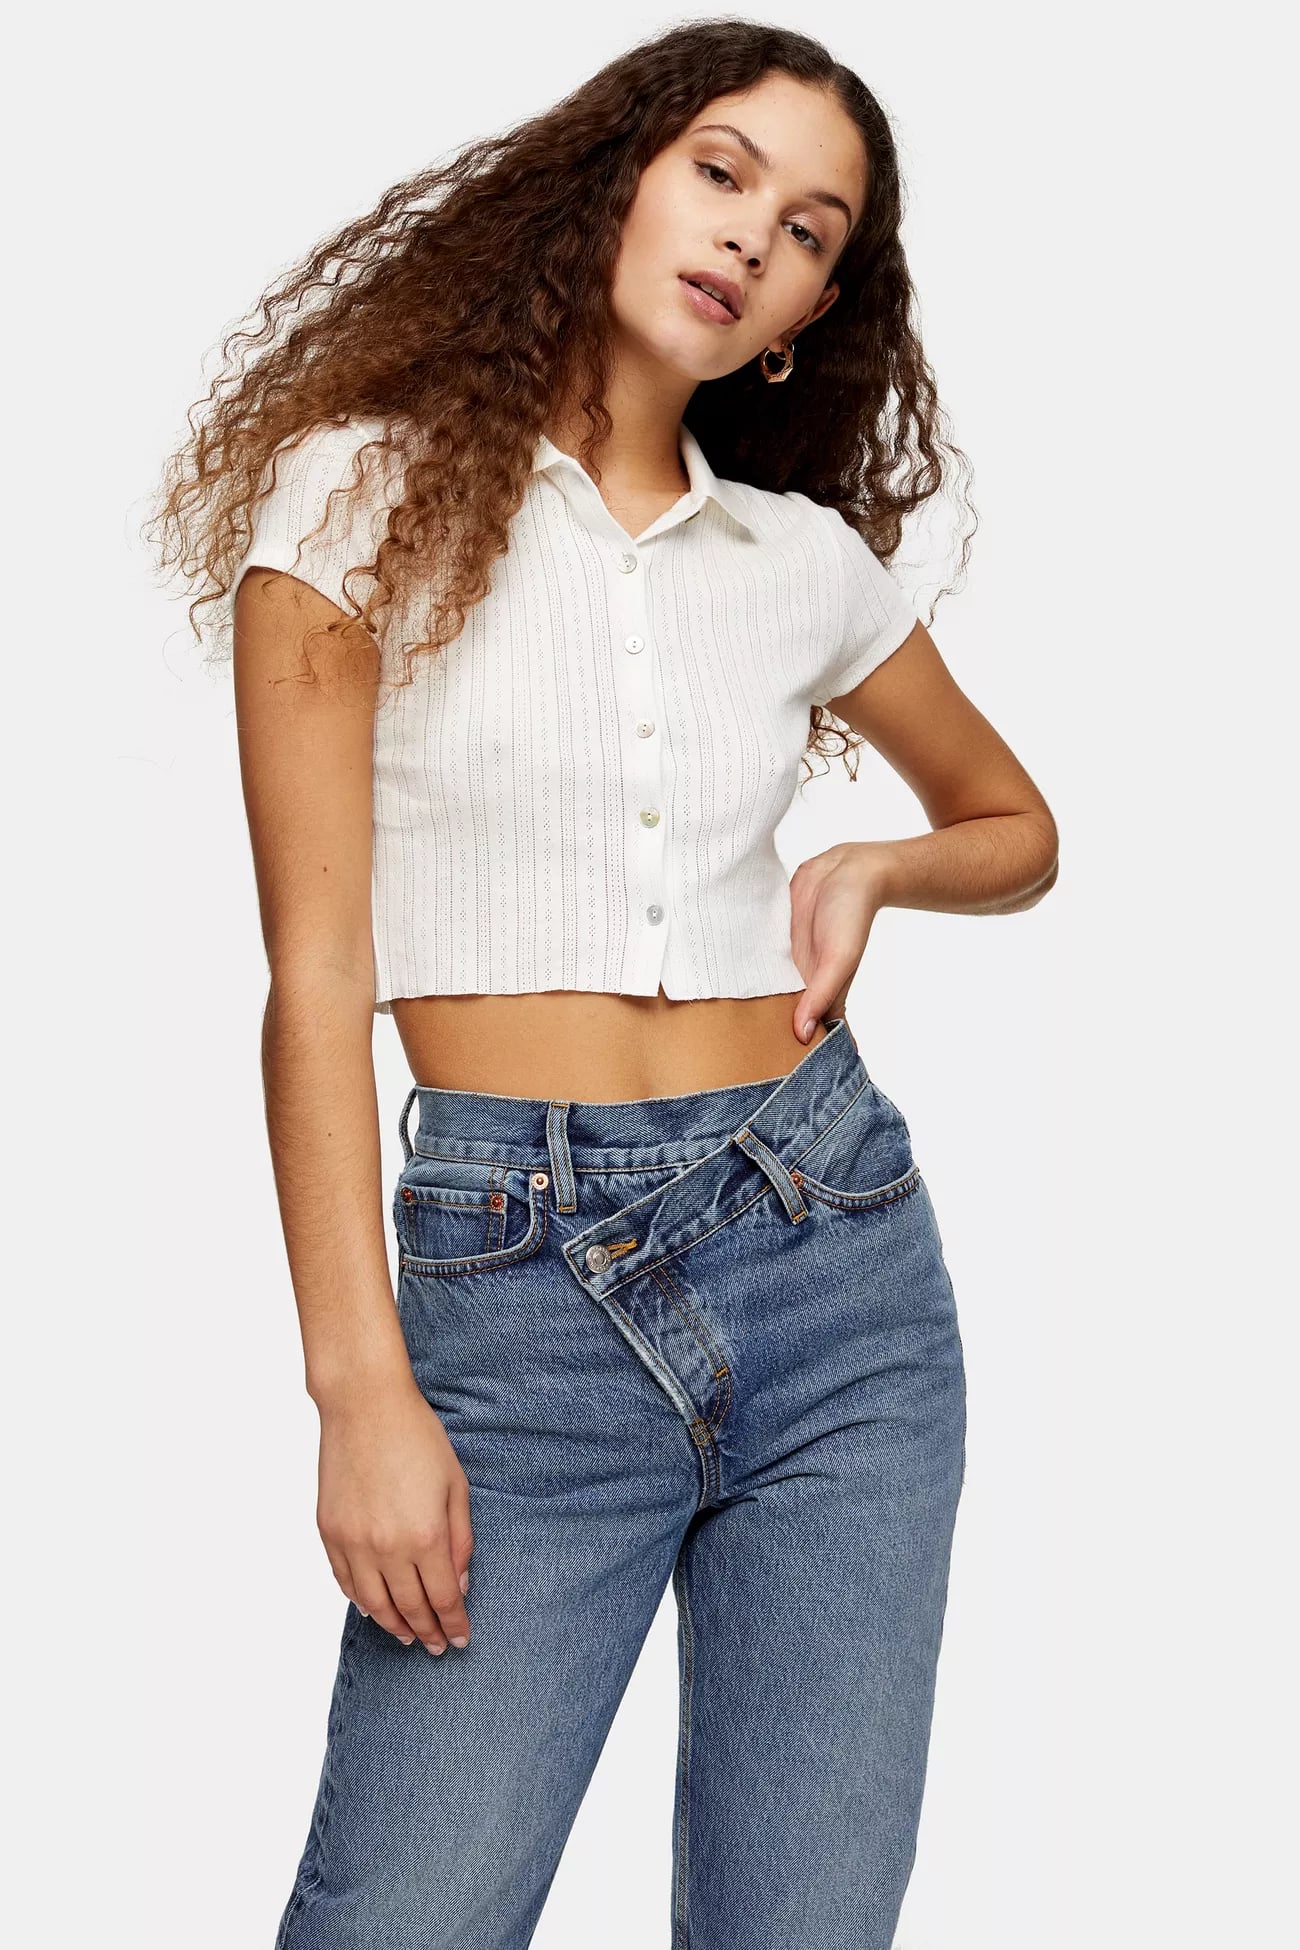 How To Wear A Crop Top For Every Body Type Popsugar Fashion